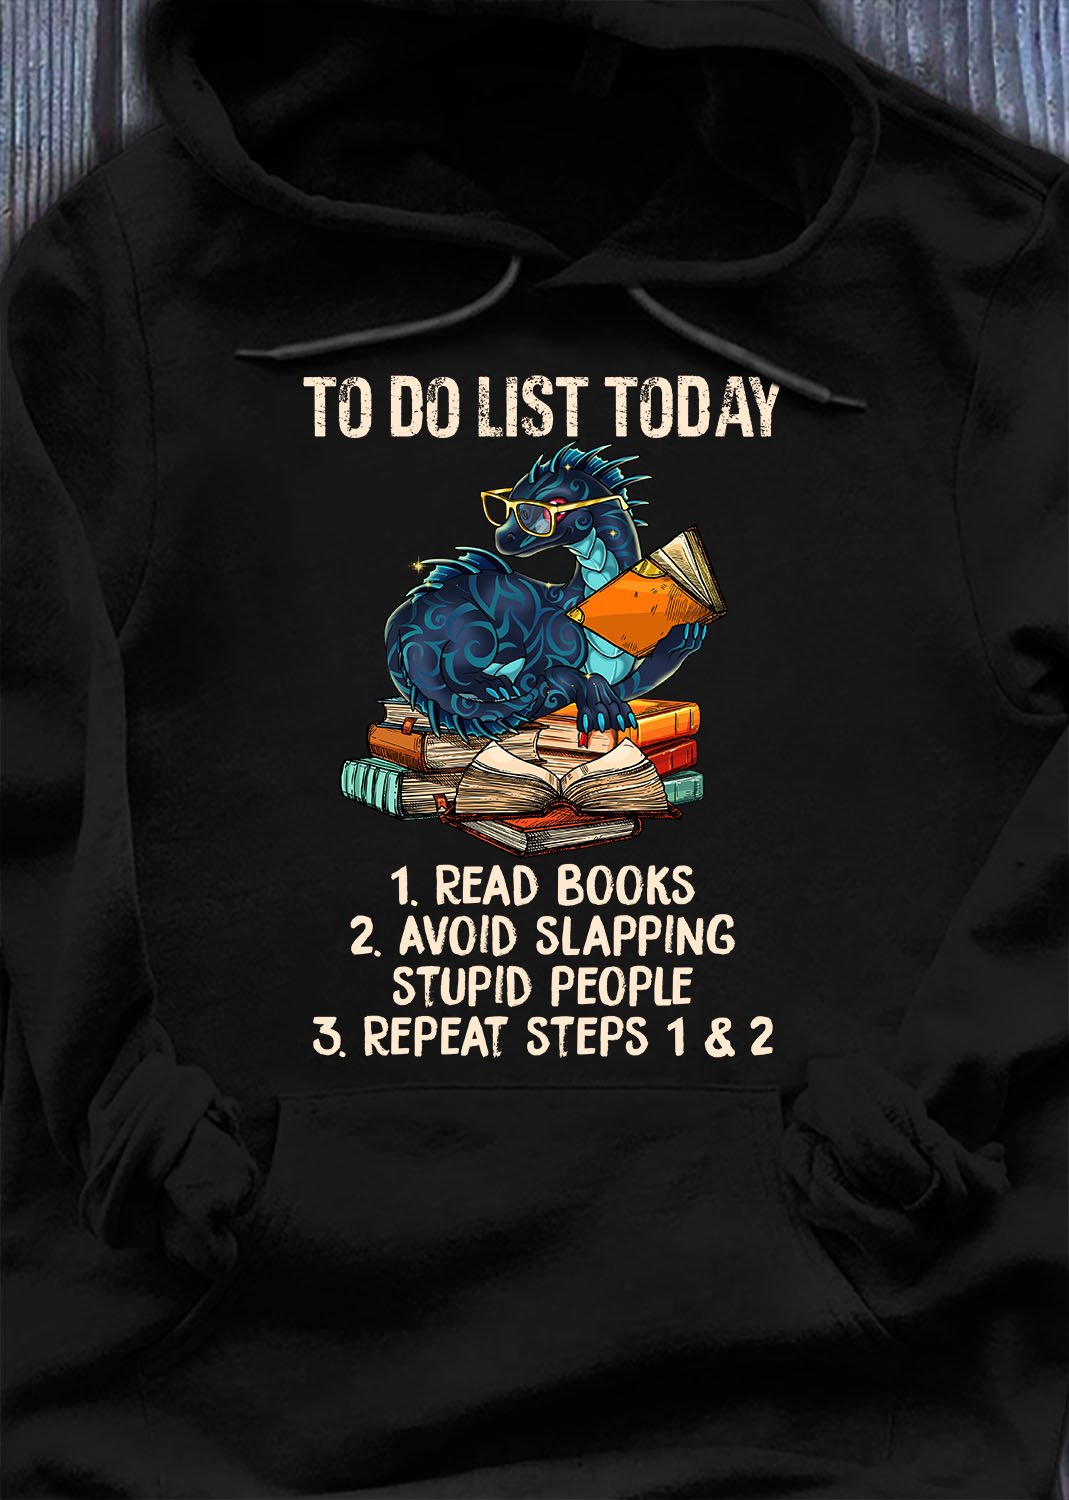 Dragon- to do list today: Read books, avoid slapping stupid people and repeat step 1,2,3